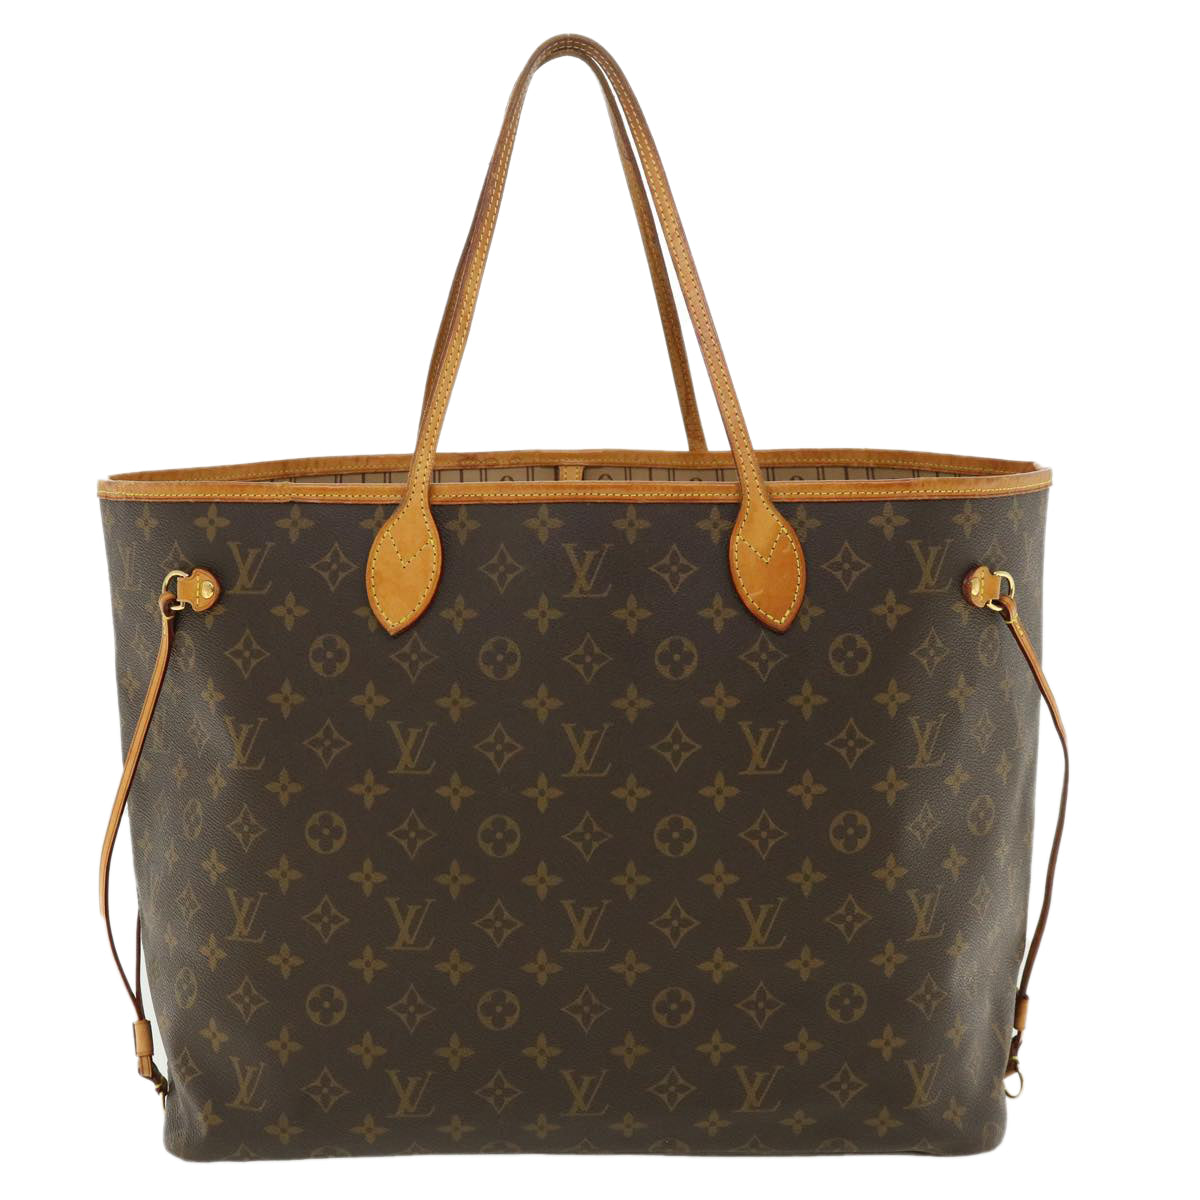 Shop Louis Vuitton NEVERFULL Unisex Leather Elegant Style Shoulder Bags  (M46786) by からんからん